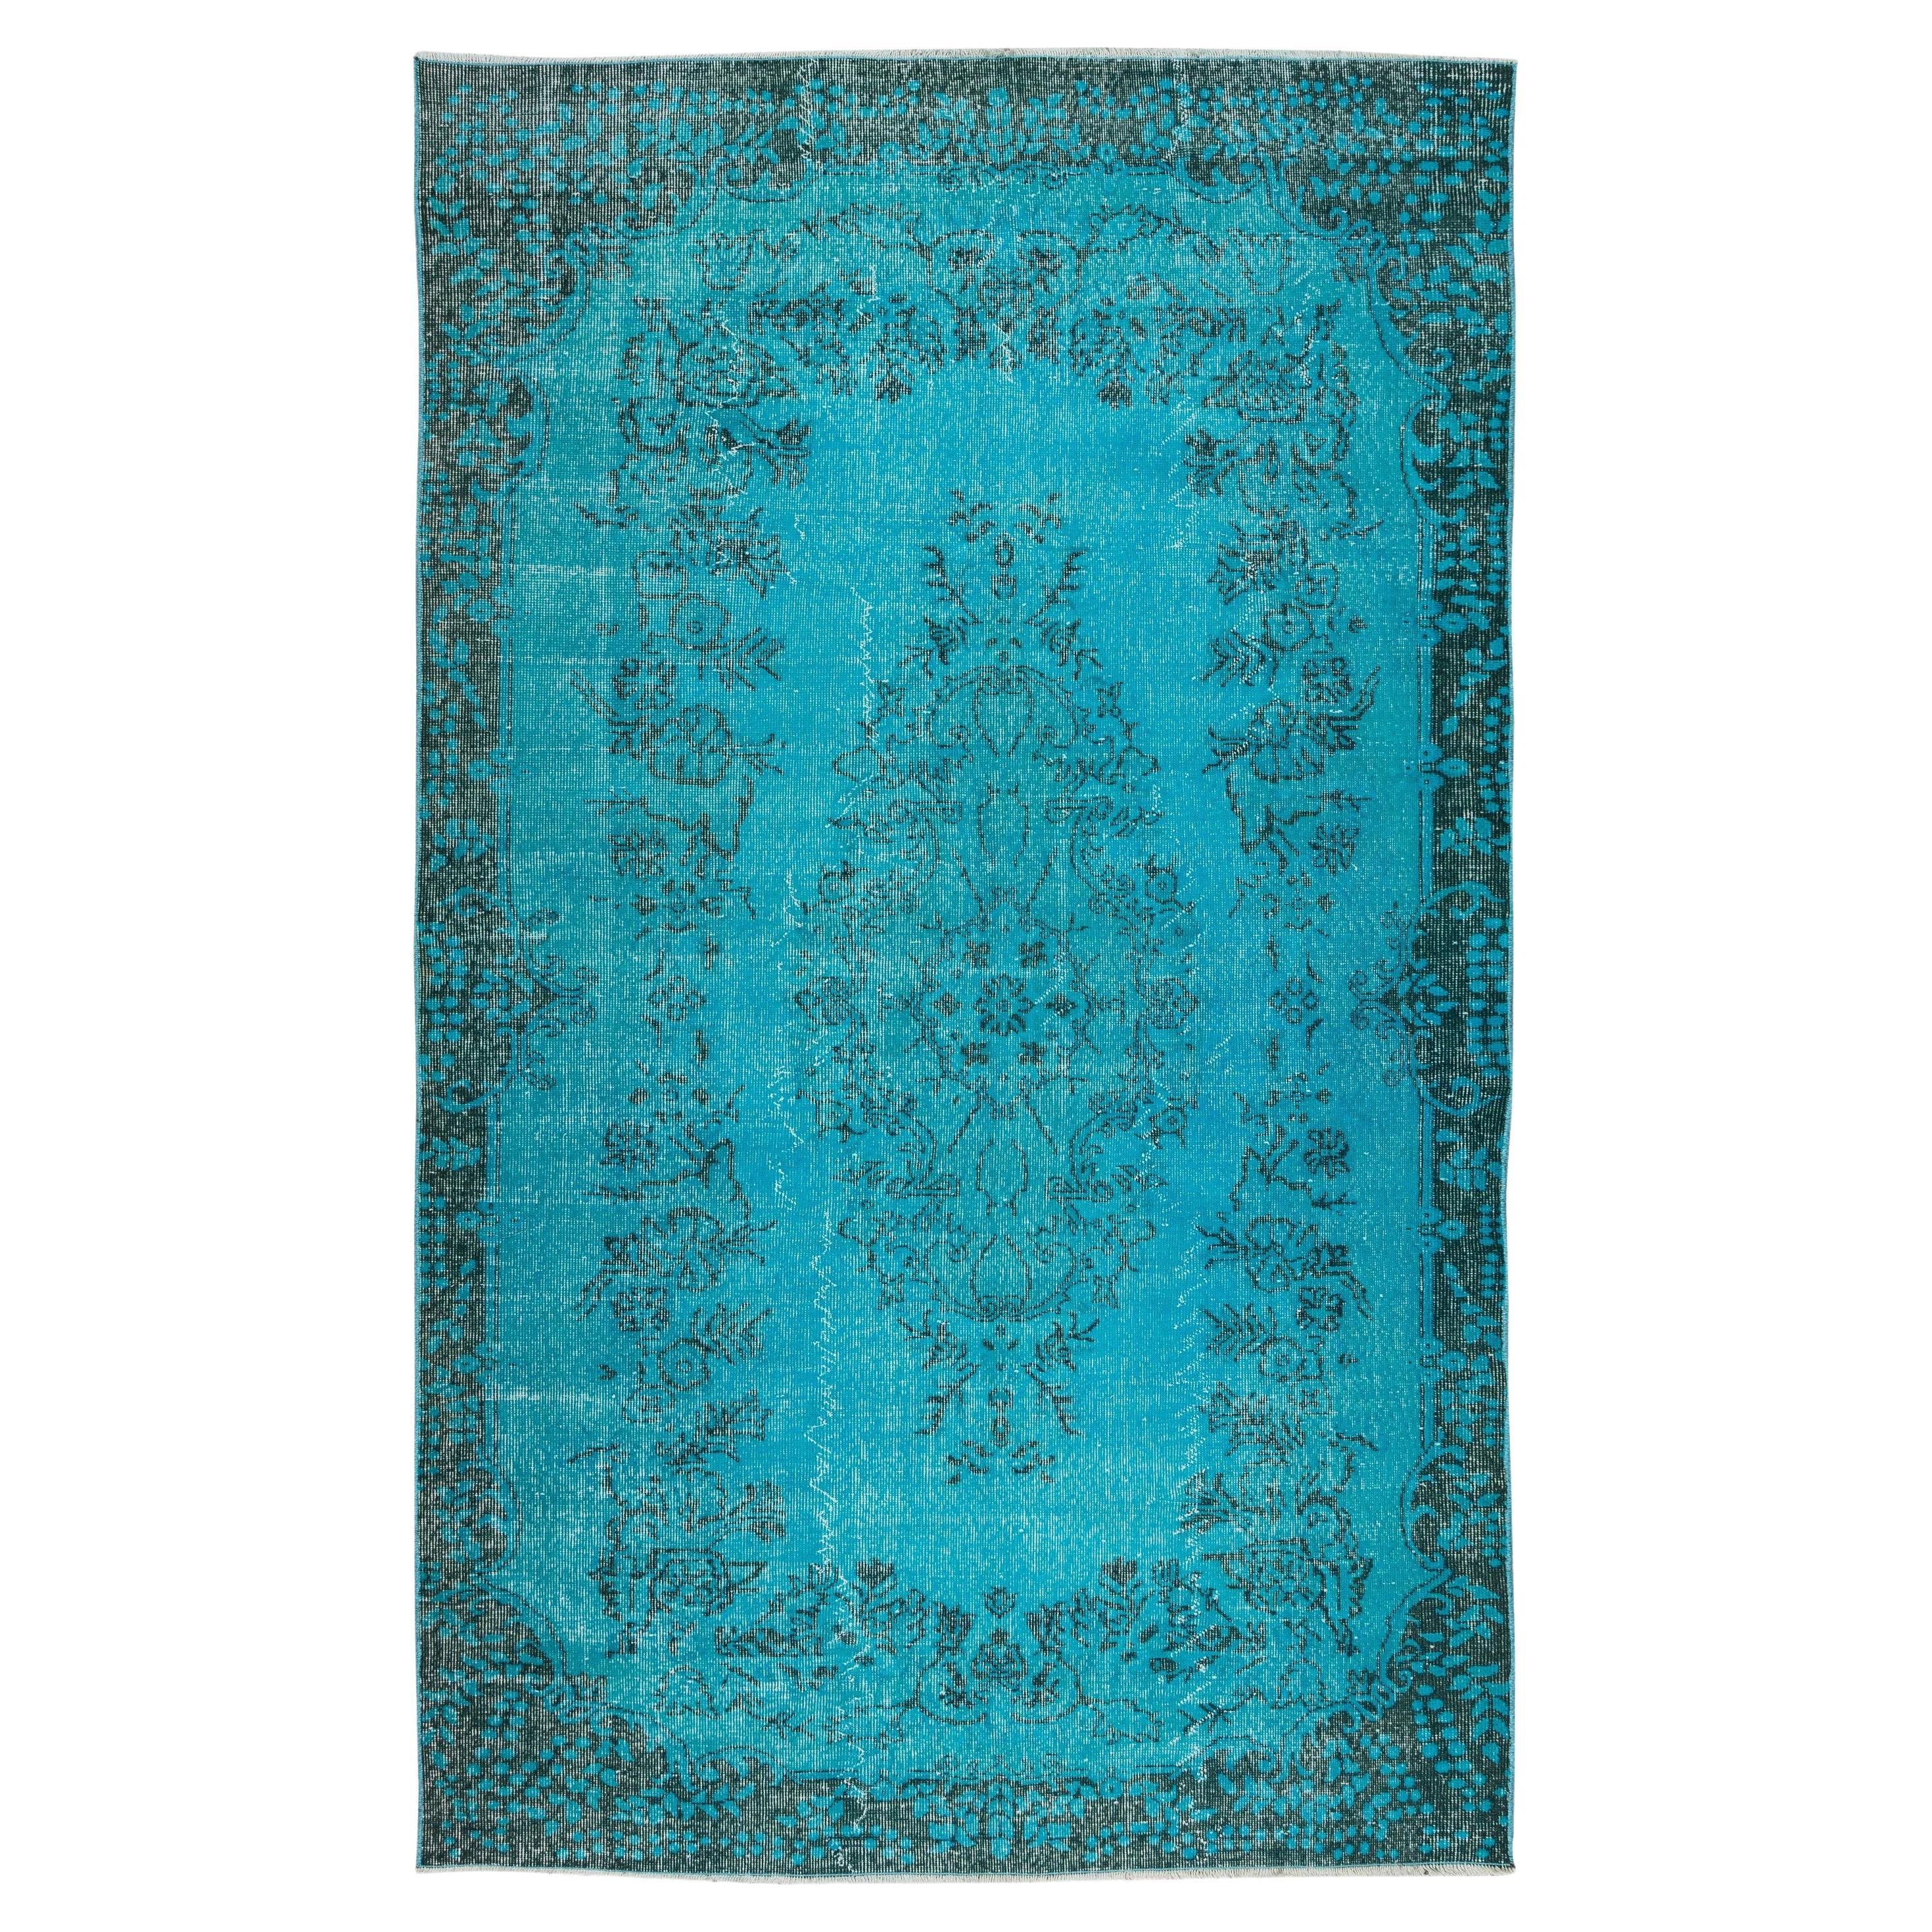 6x9.8 Ft Vintage Handmade Turkish Rug Over-Dyed in Teal Blue 4 Modern Interiors